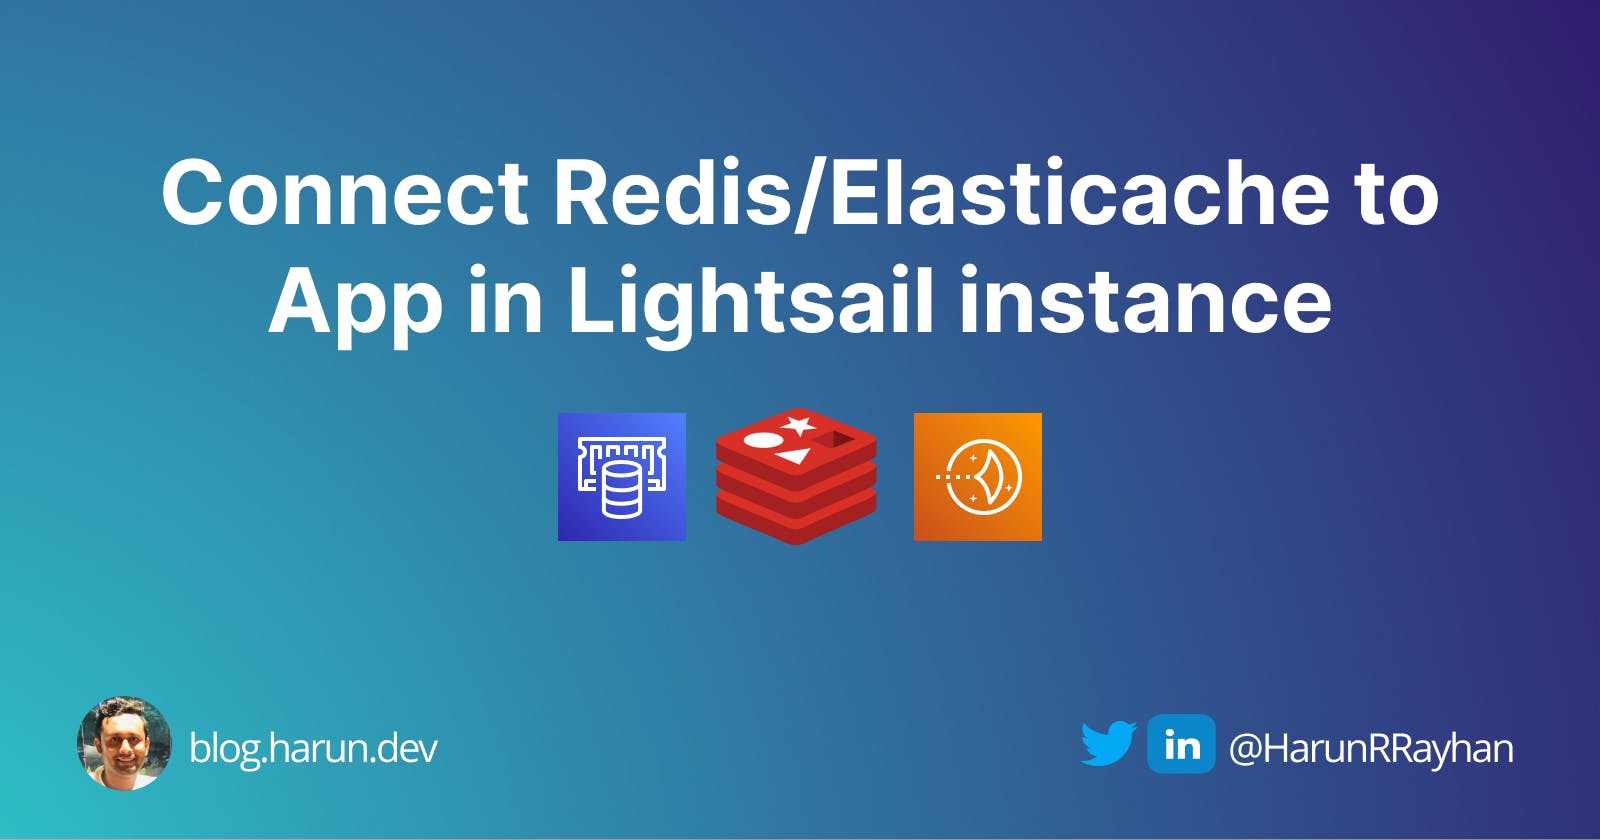 Connect Redis/Elasticache to application in Amazon Lightsail instance